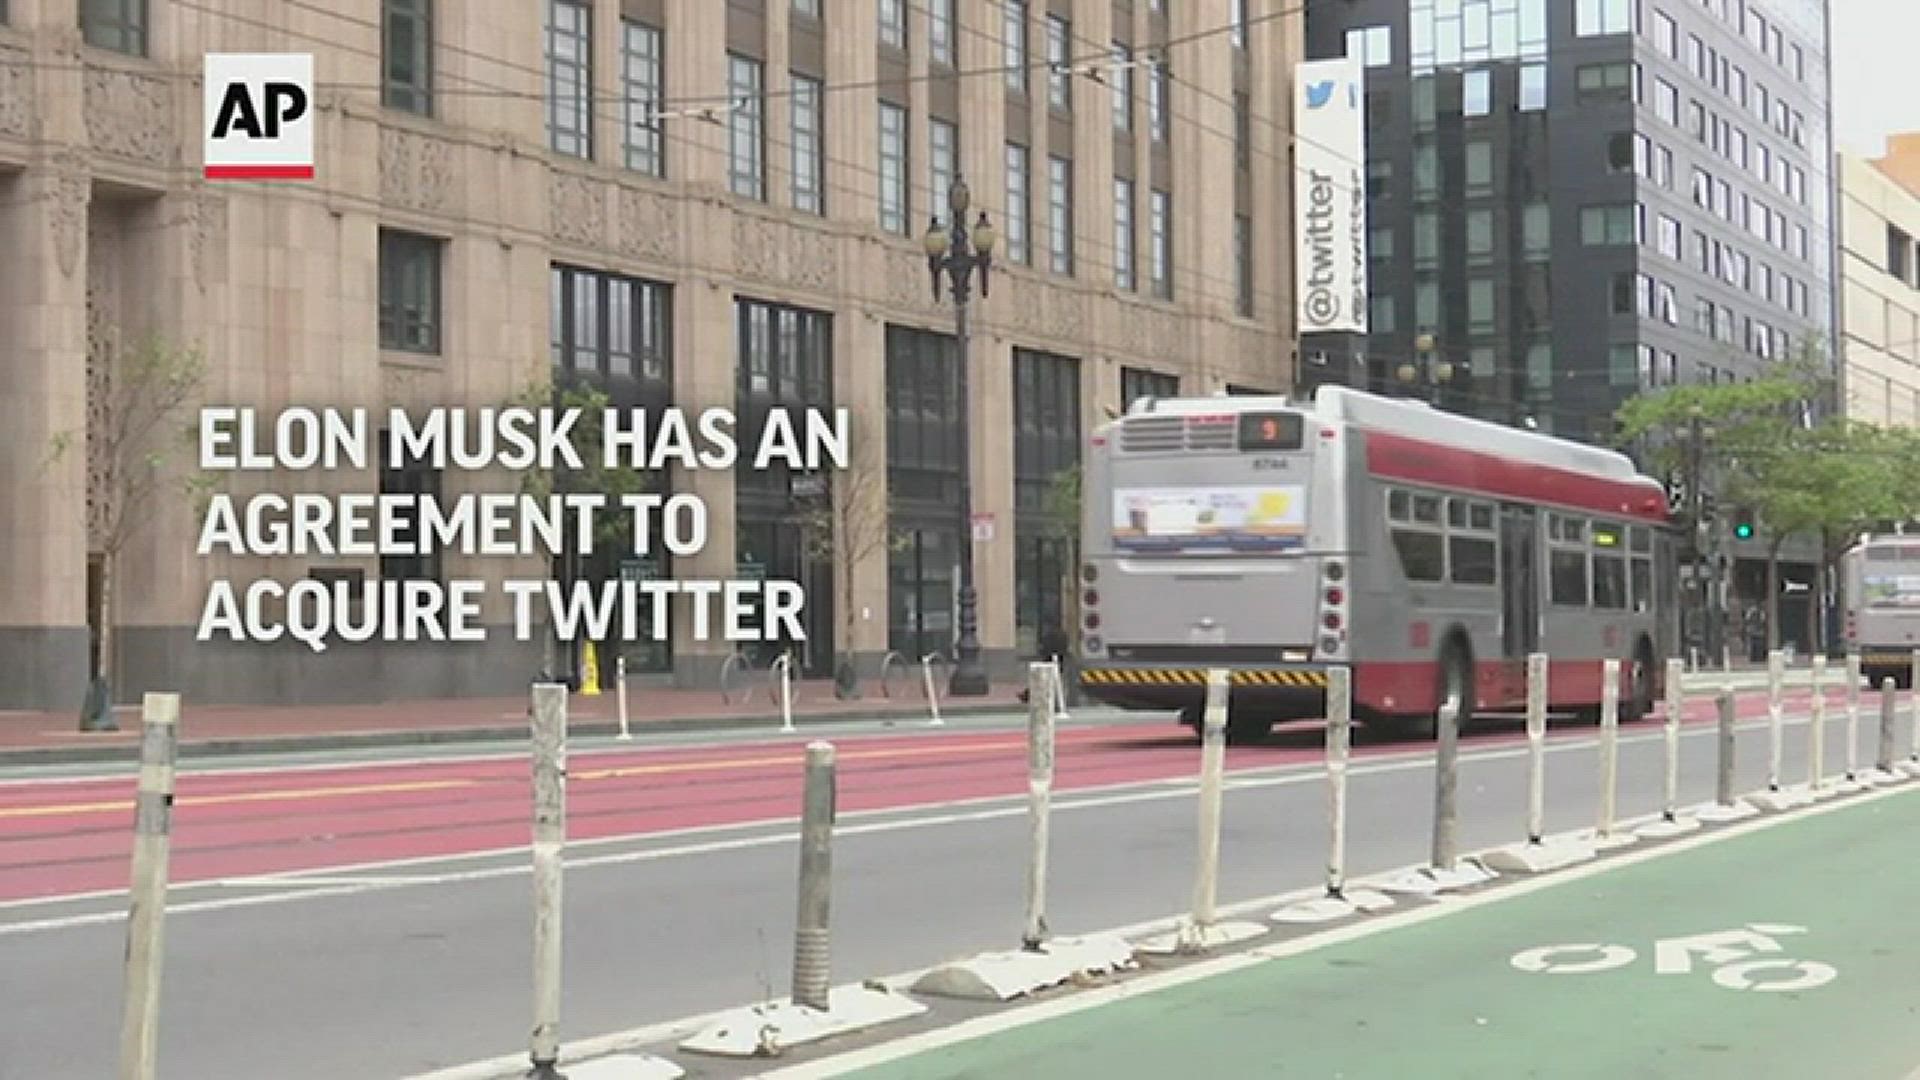 Billionaire Elon Musk has reached an agreement to acquire Twitter for approximately $44 billion, the company said.